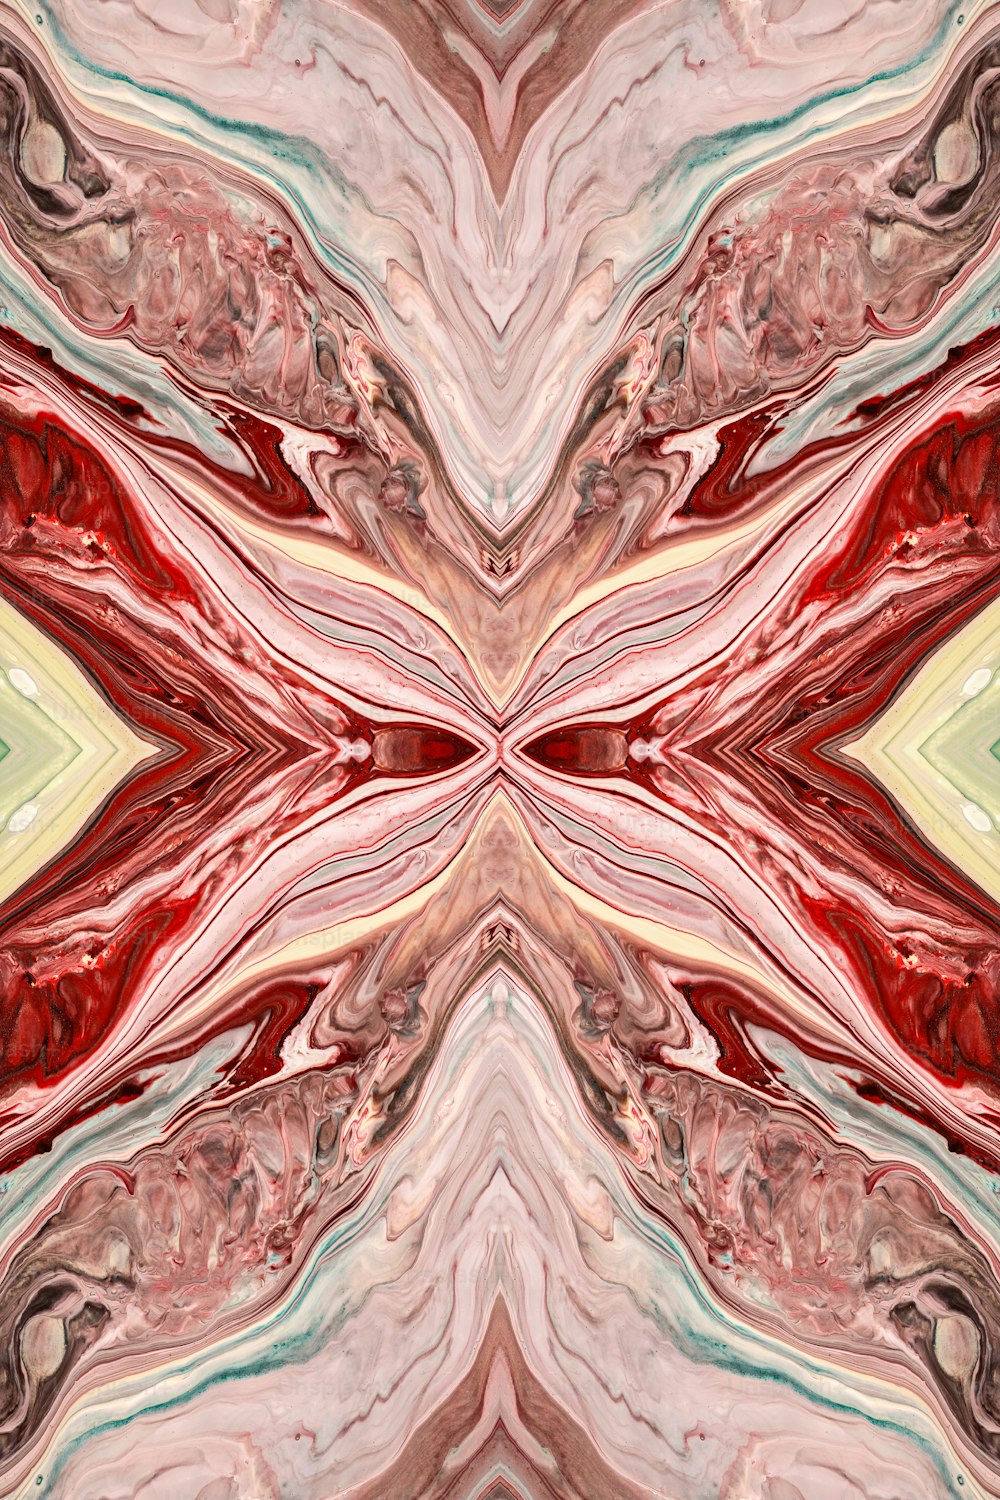 an abstract image of red, pink, and green shapes